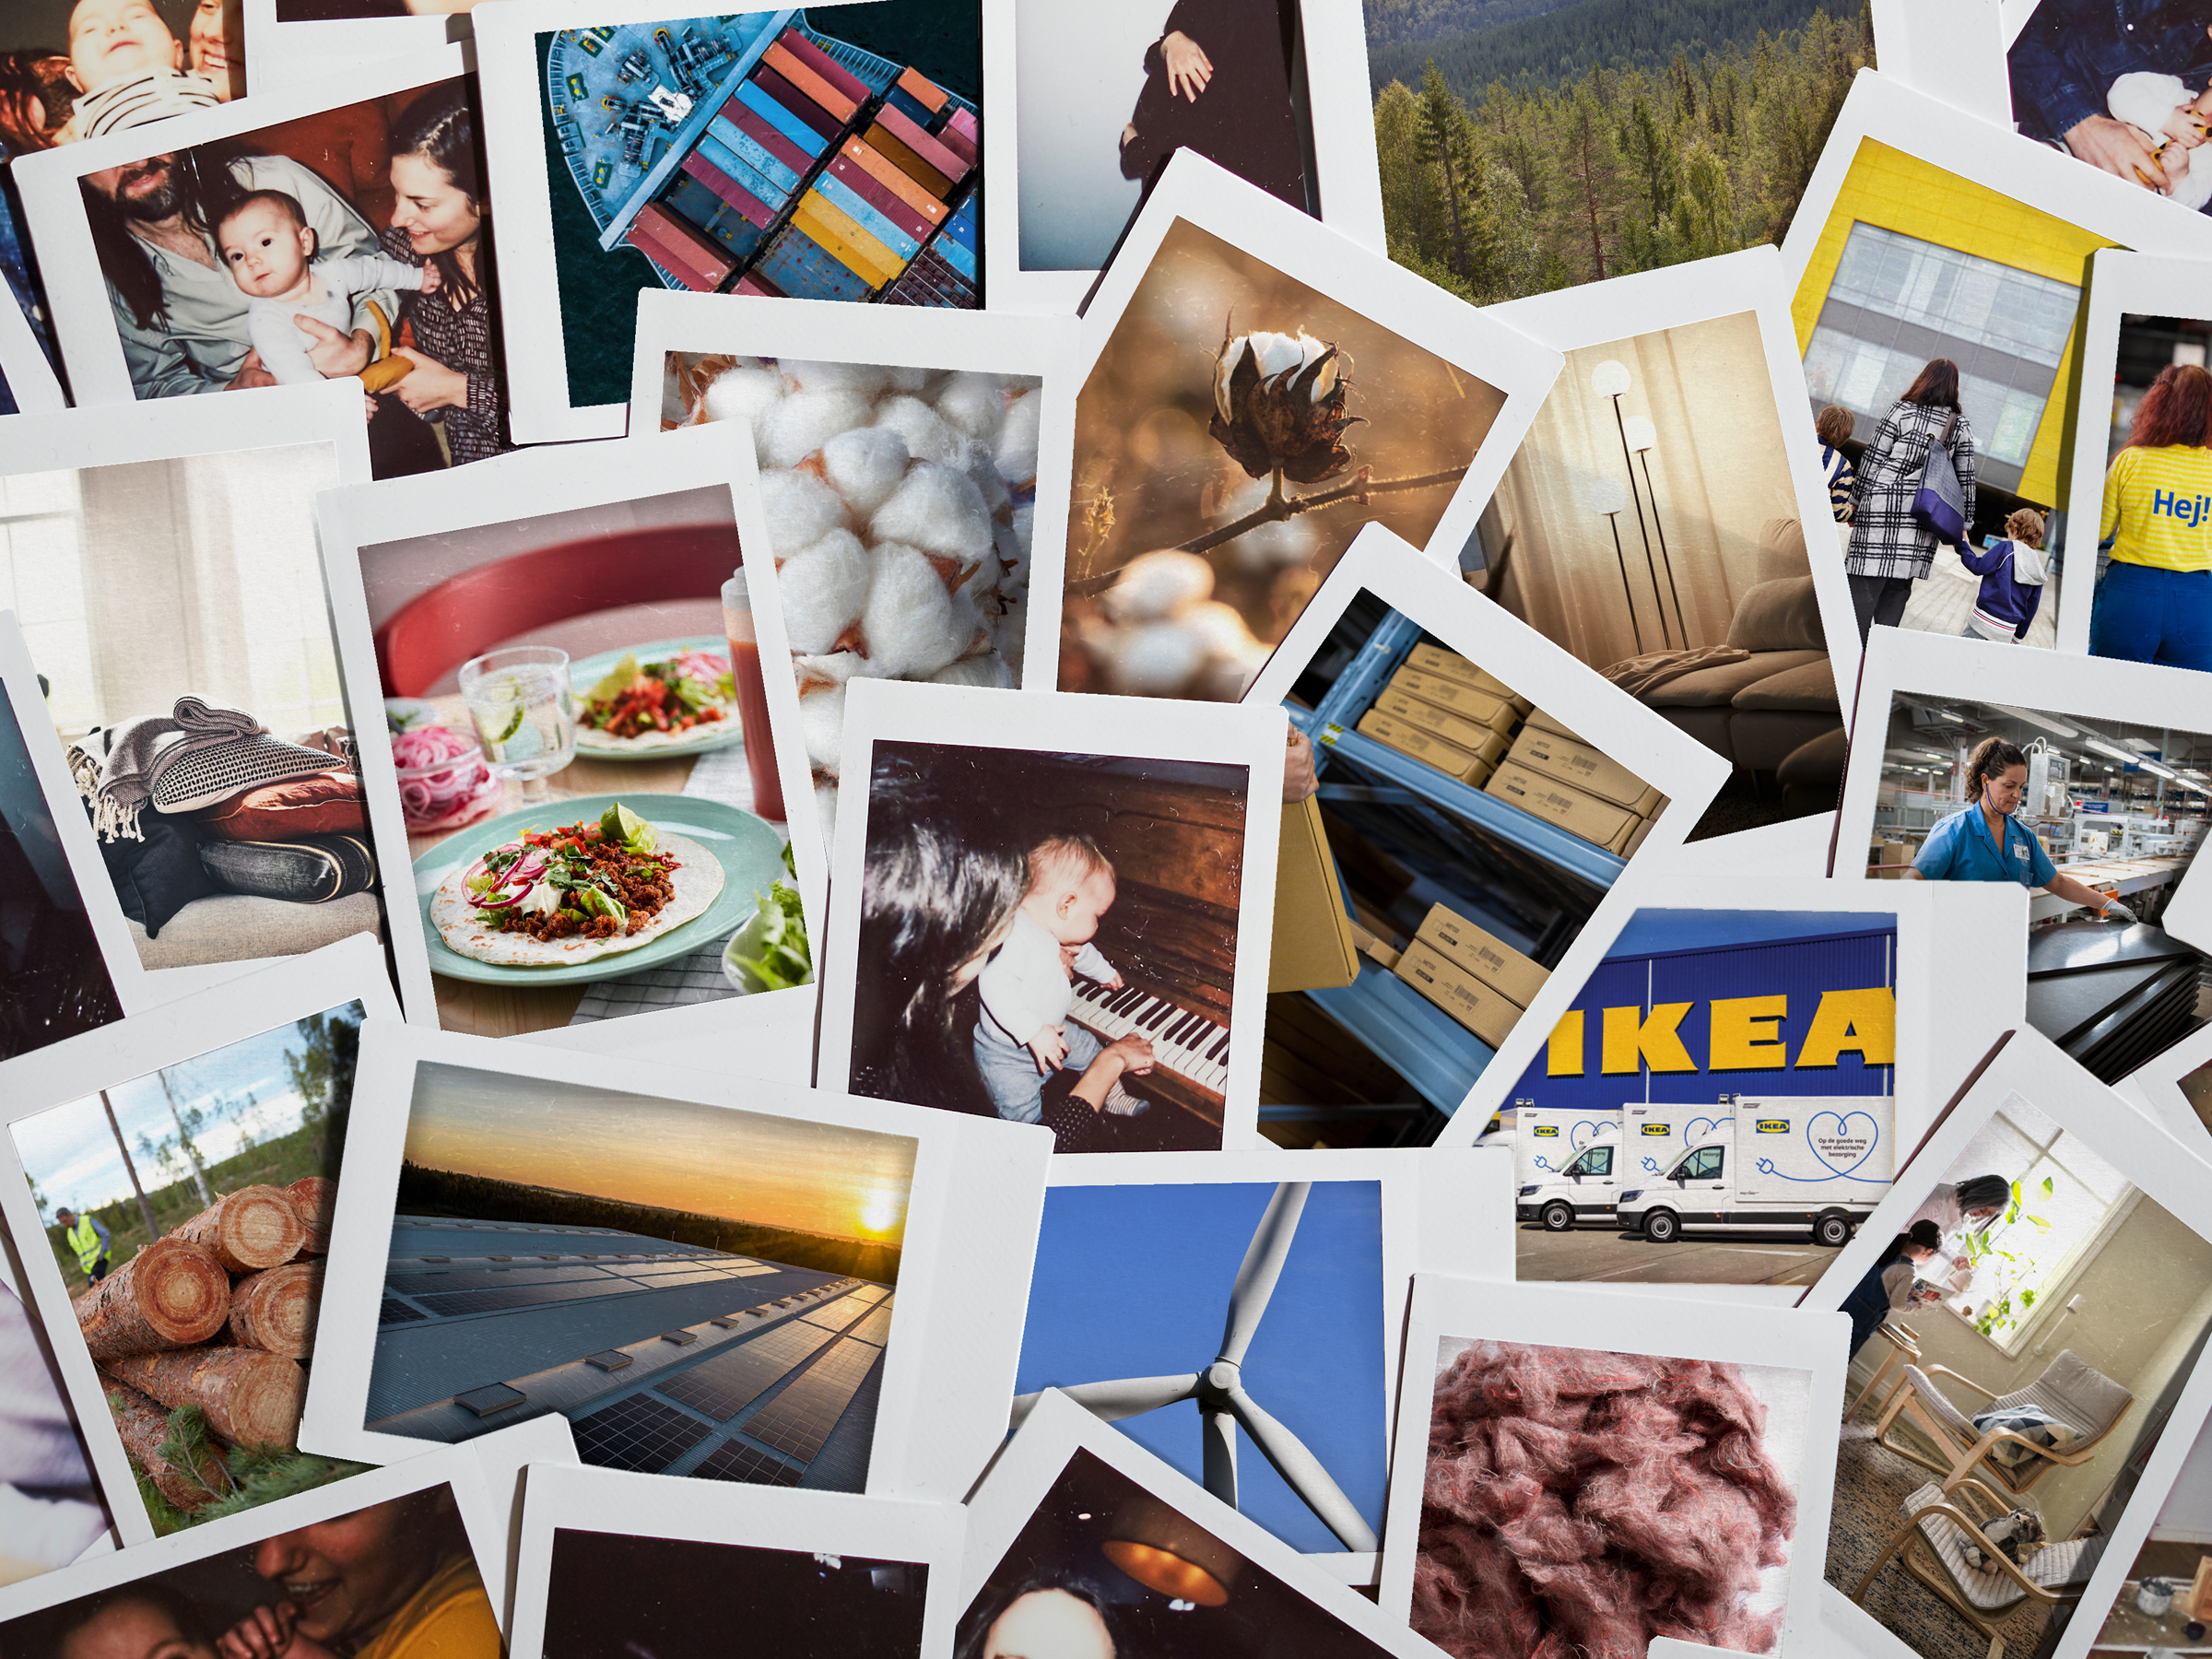 Many IKEA-related polaroid colour images of furniture, lamps, cotton plants, a baby, a freighter, foods on plates and more.